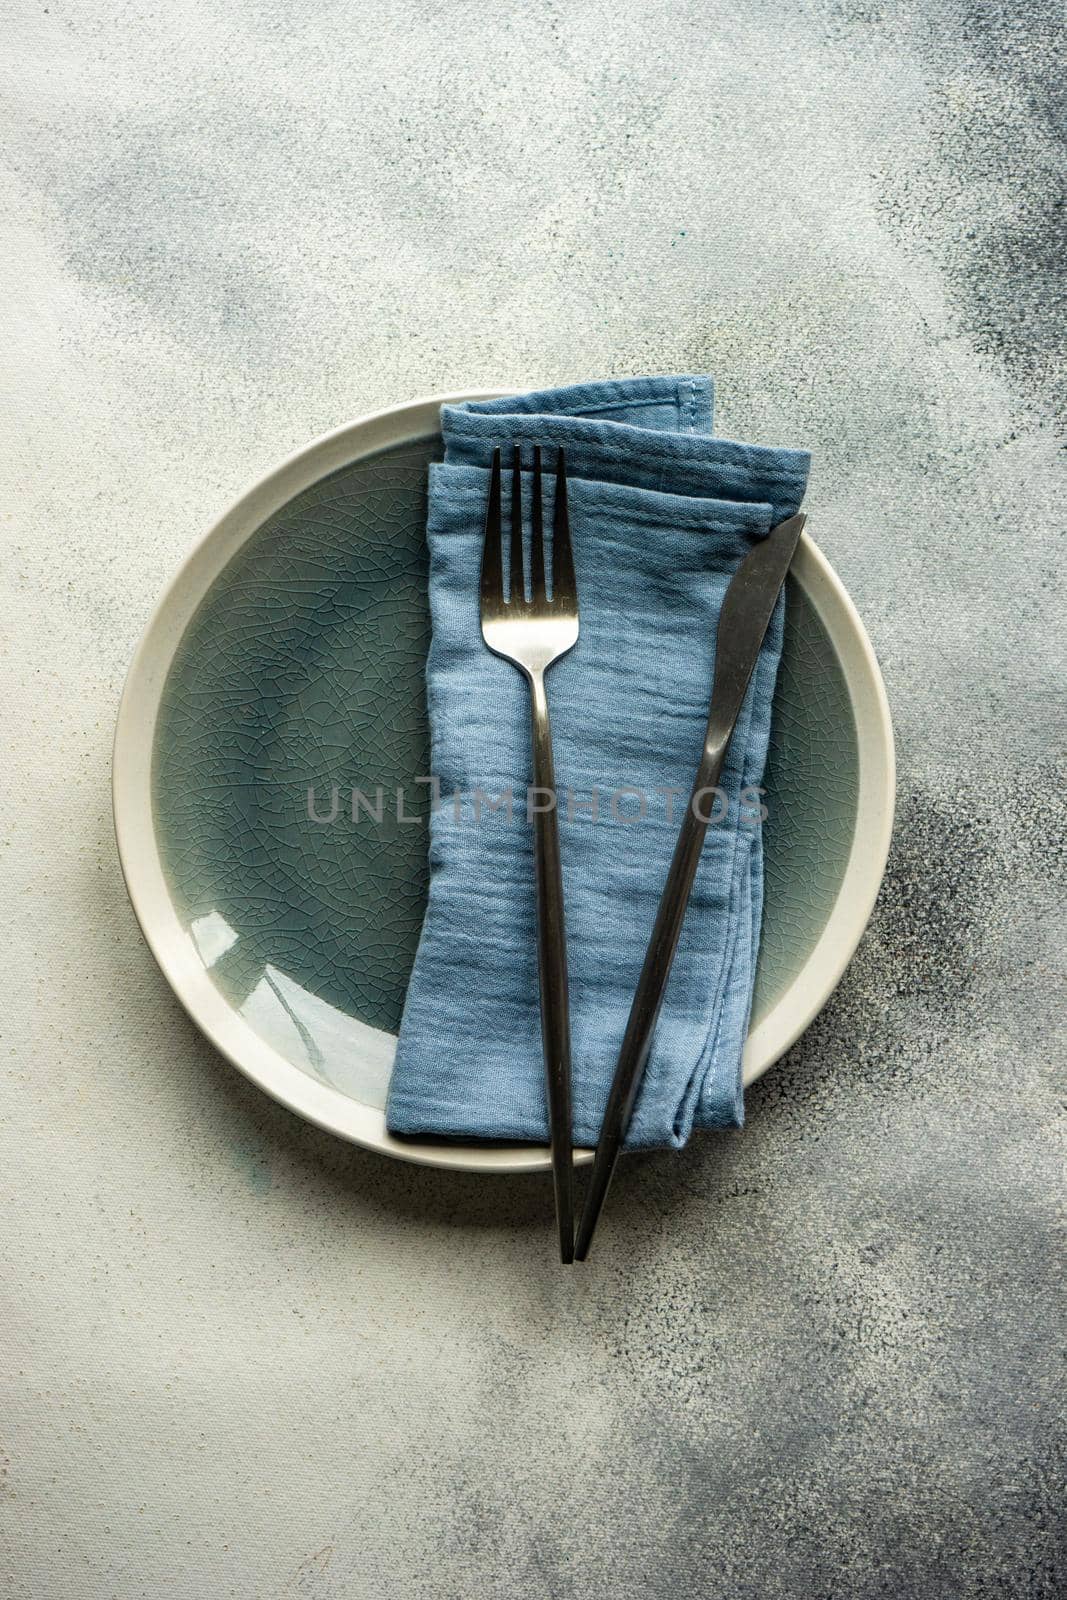 Minimalistic table setting with plate and cutlery by Elet